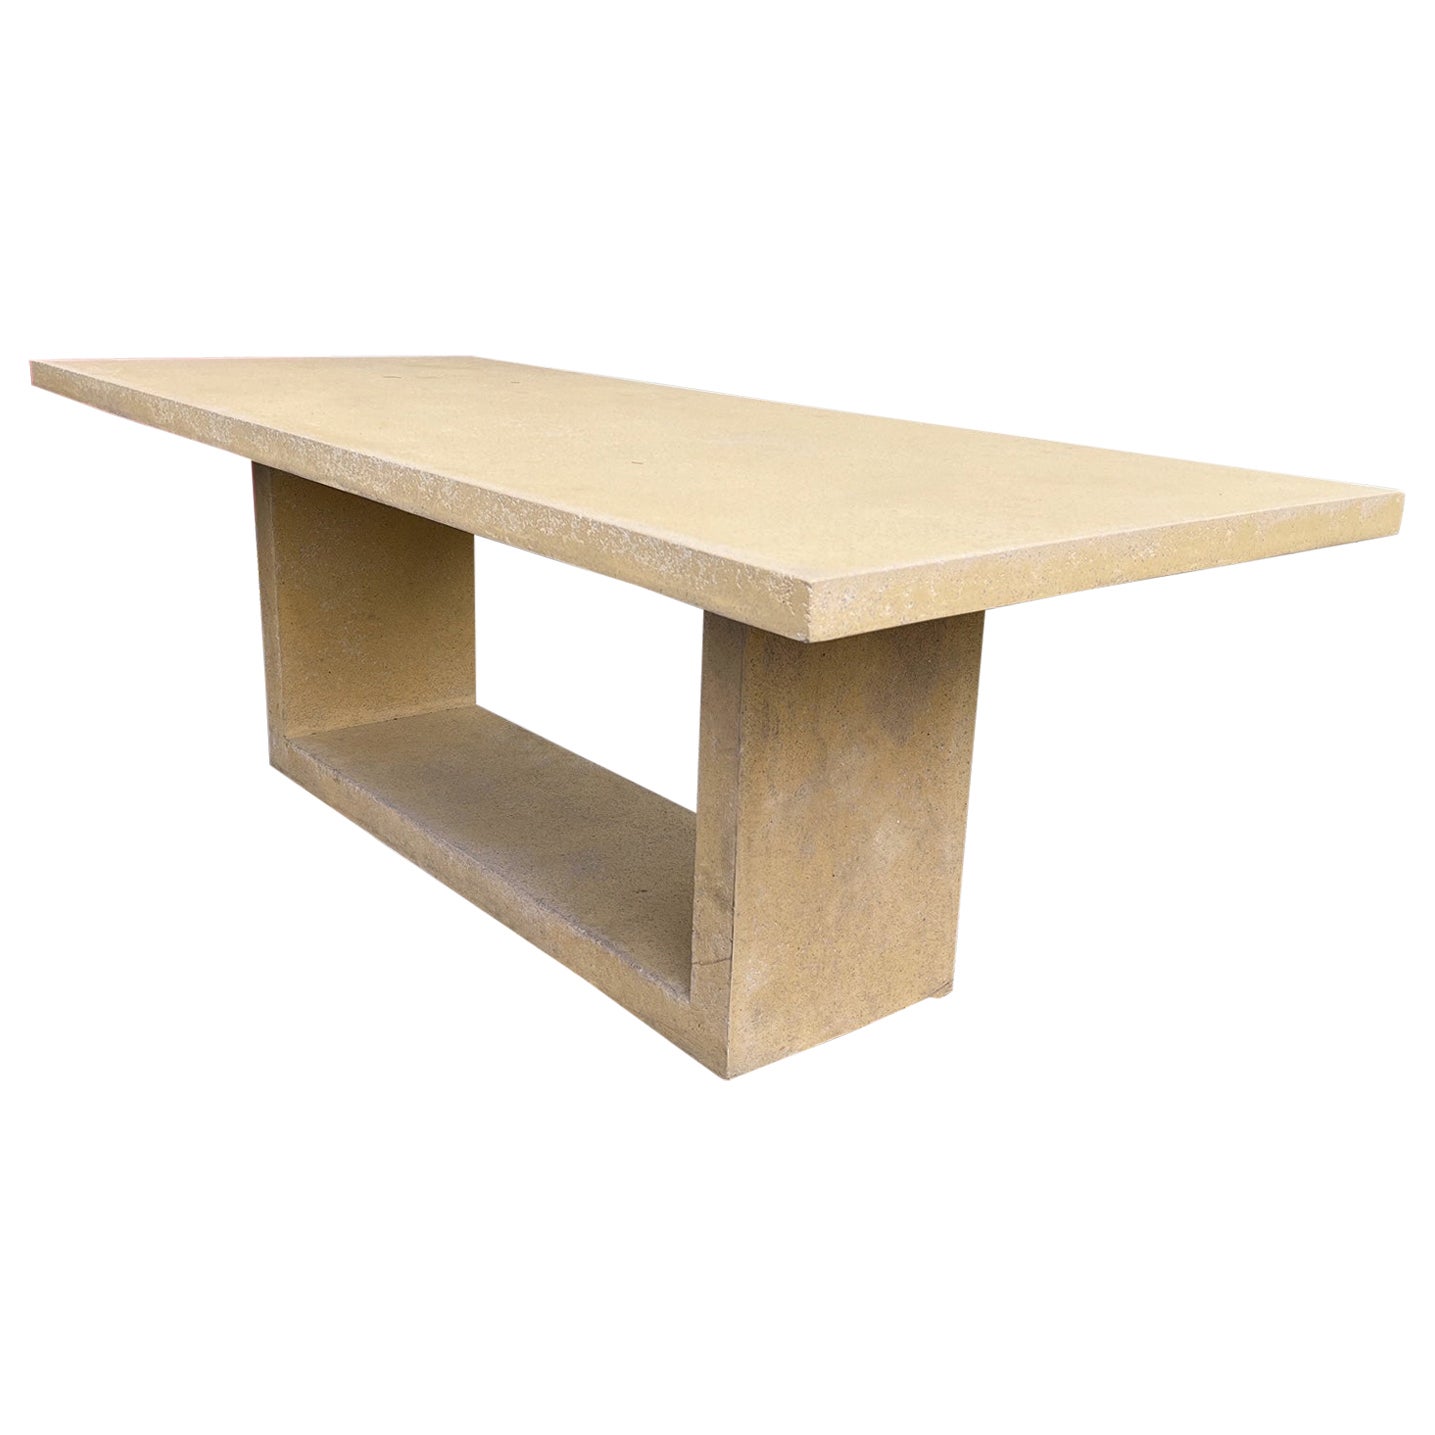 Cast Resin 'Apertura' Dining Table, Sonoran Yellow Finish by Zachary A. Design For Sale